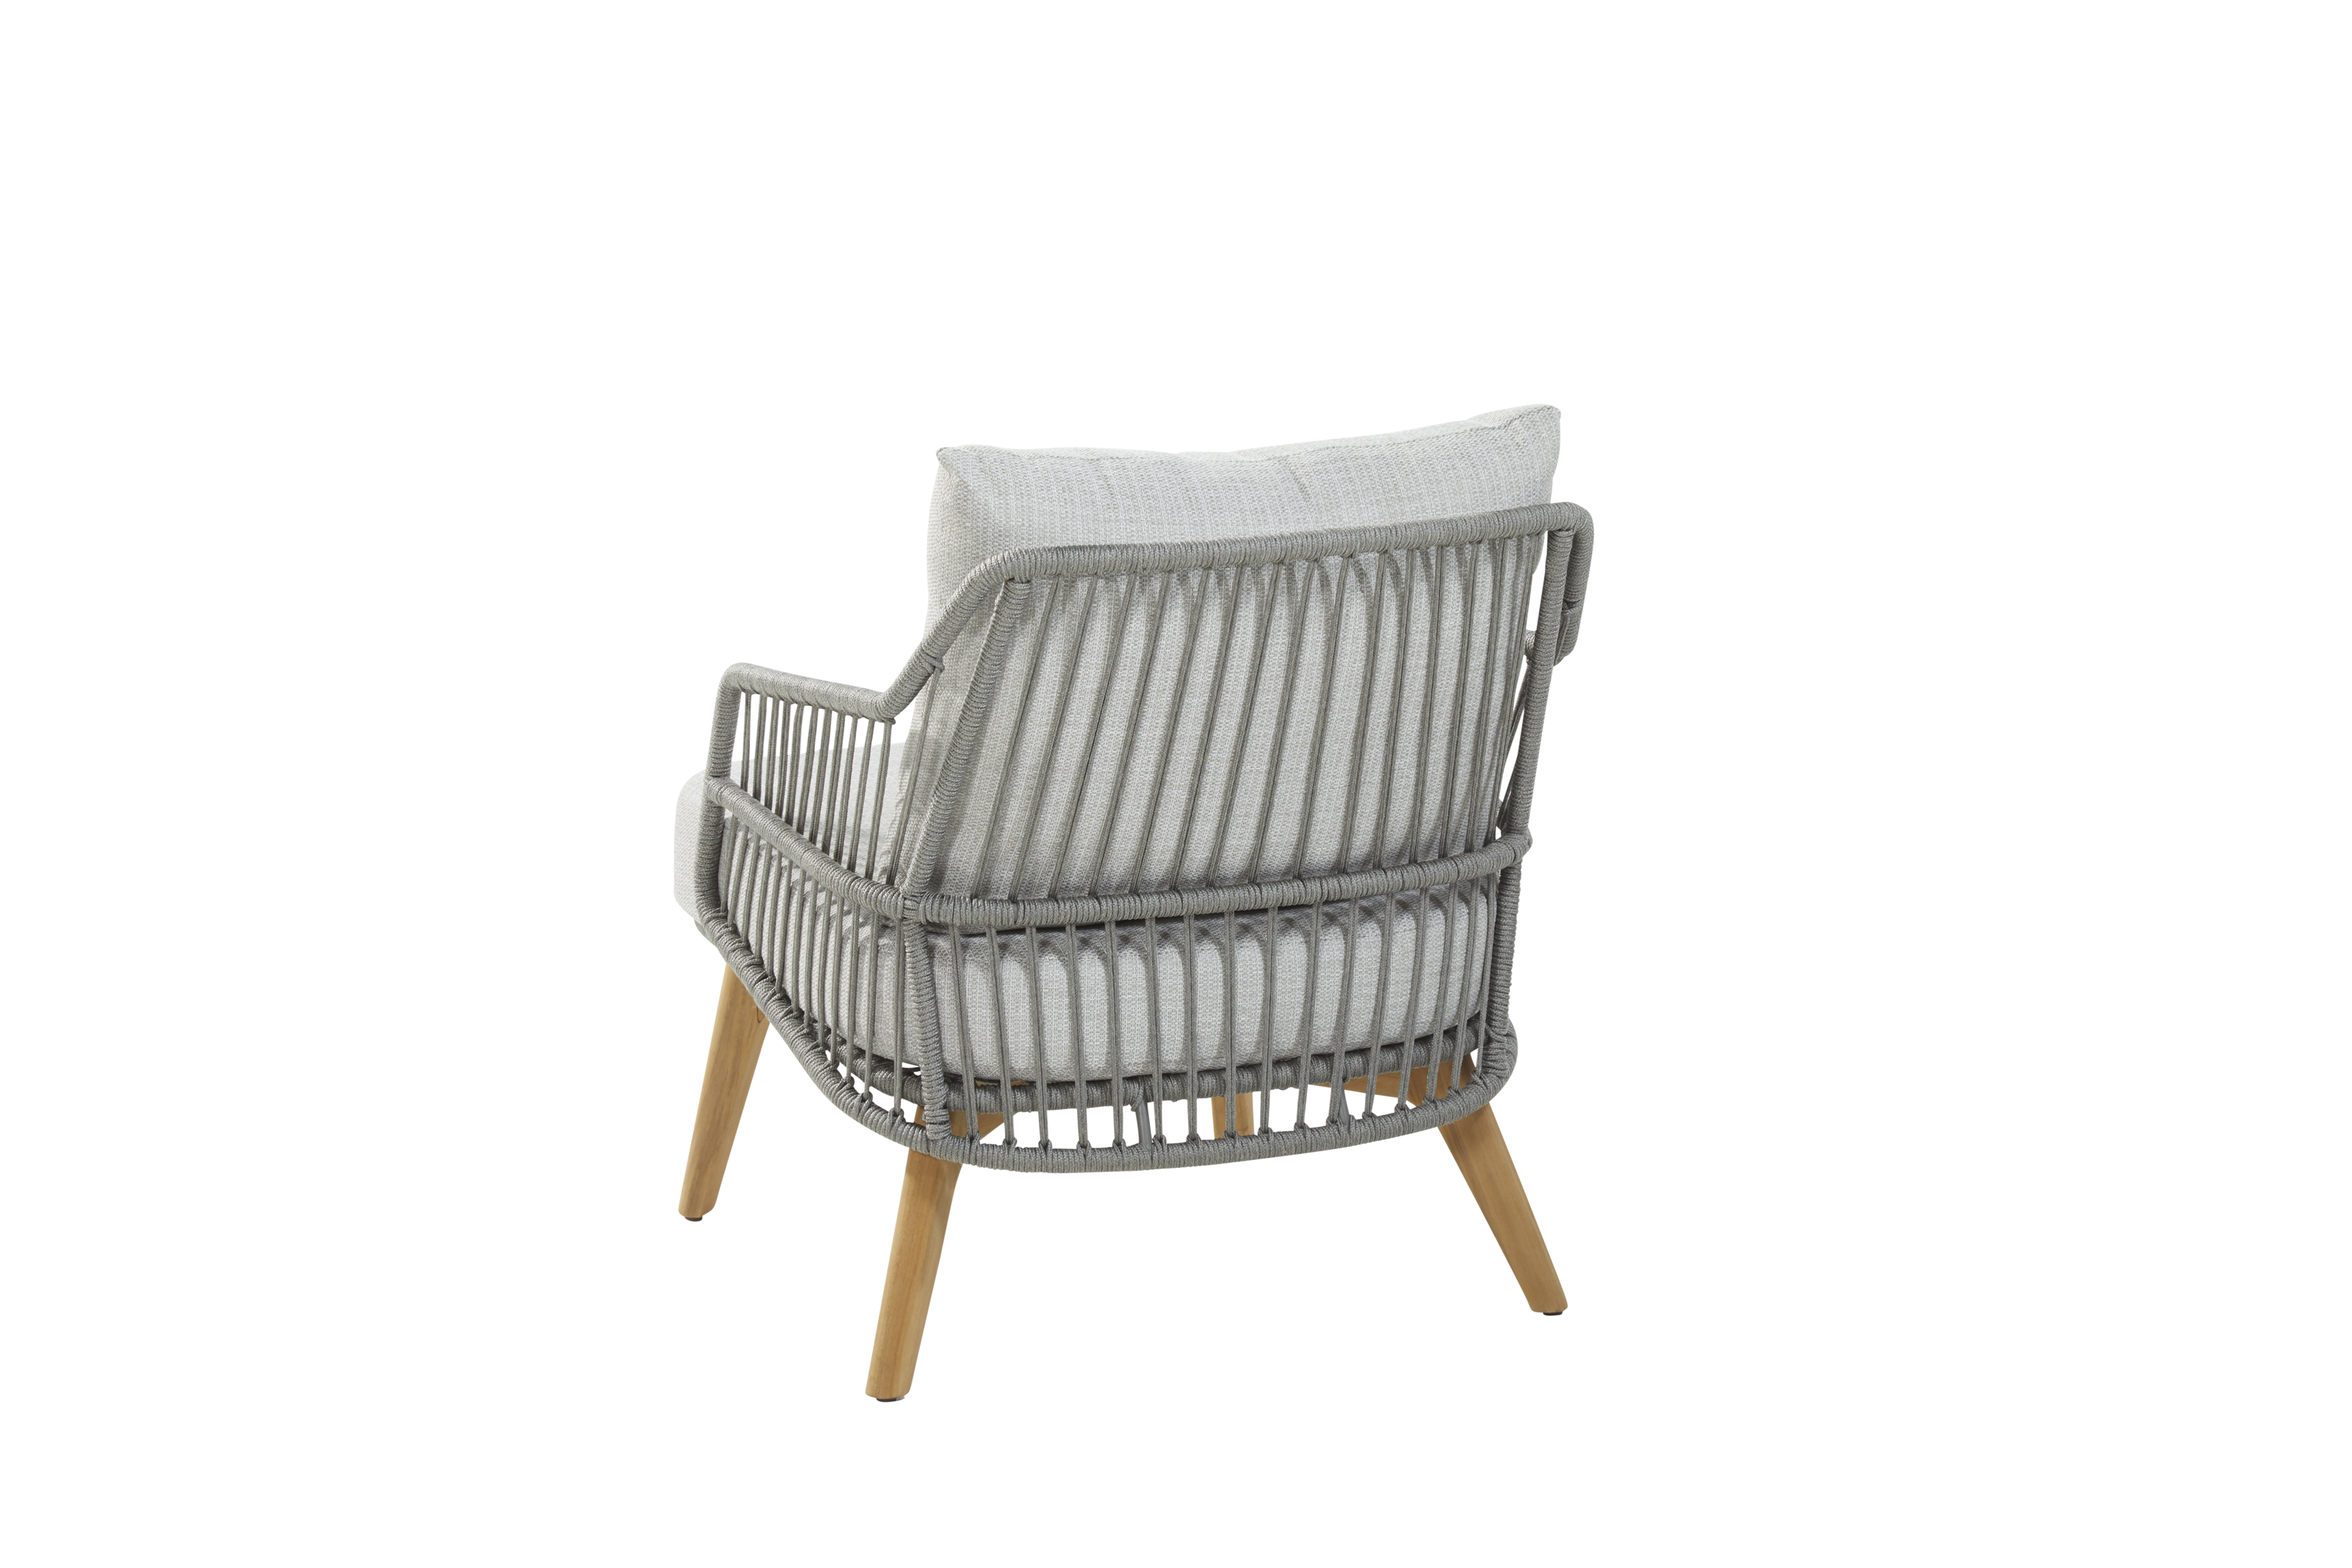 4 Seasons Outdoor Sempre Living Chair Teak Silver Grey With 2 Cushions